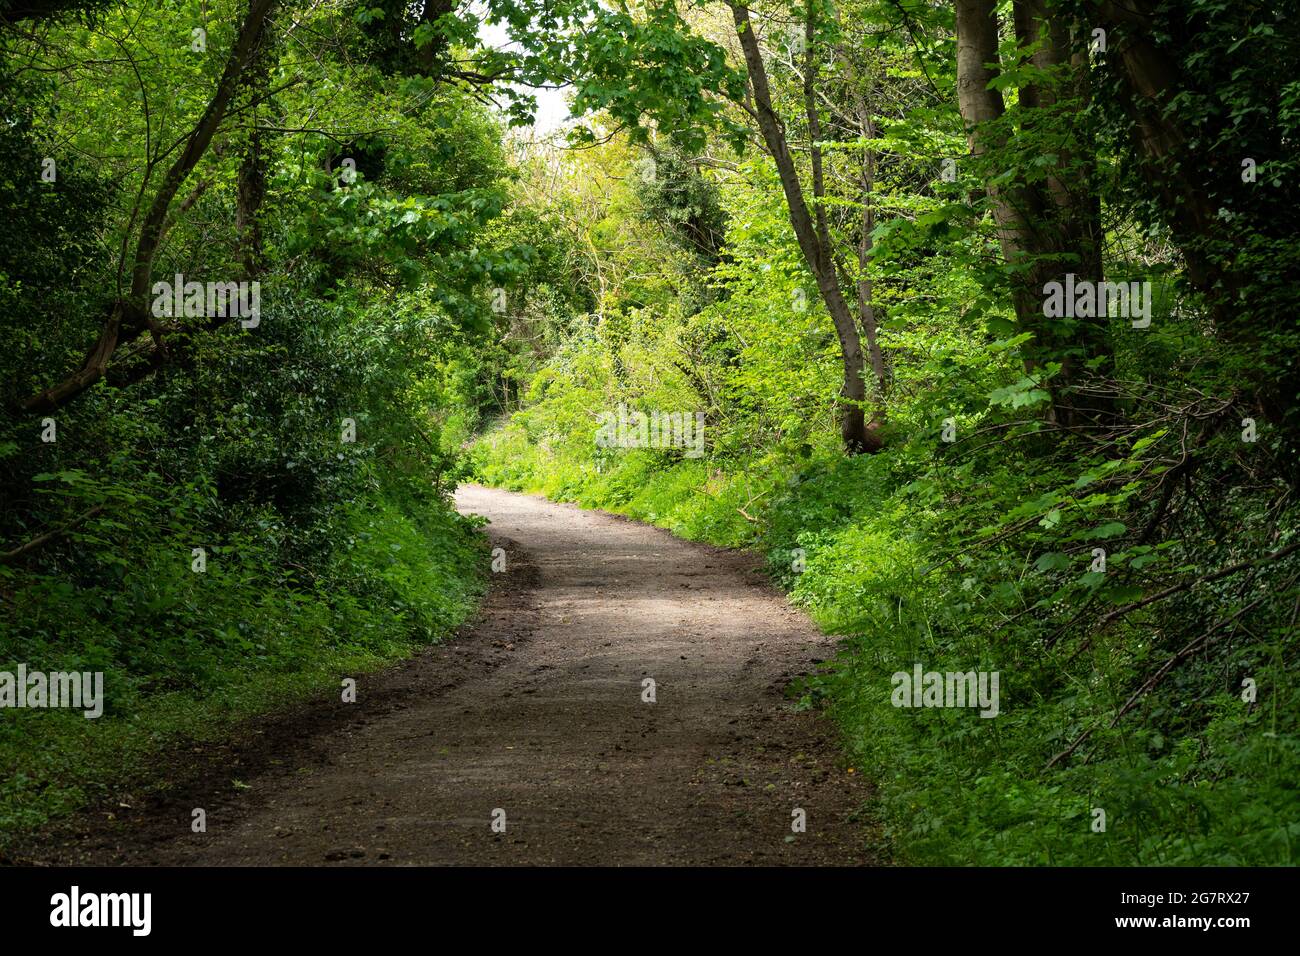 Rough dirt road in woodland example Stock Photo